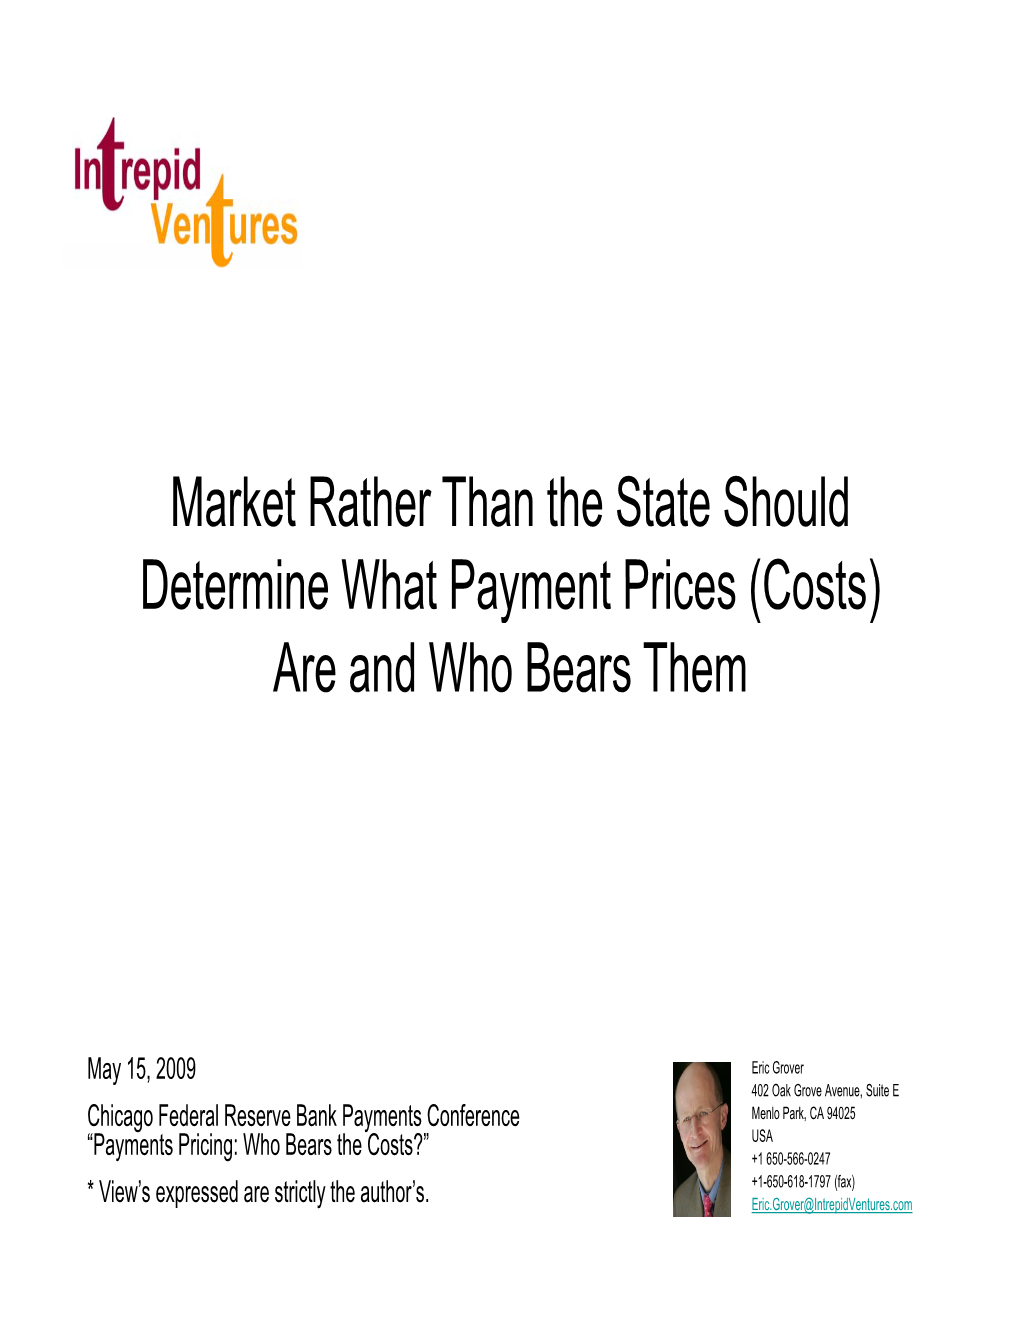 Determine What Payment Prices (Costs) Are and Who Bears Them